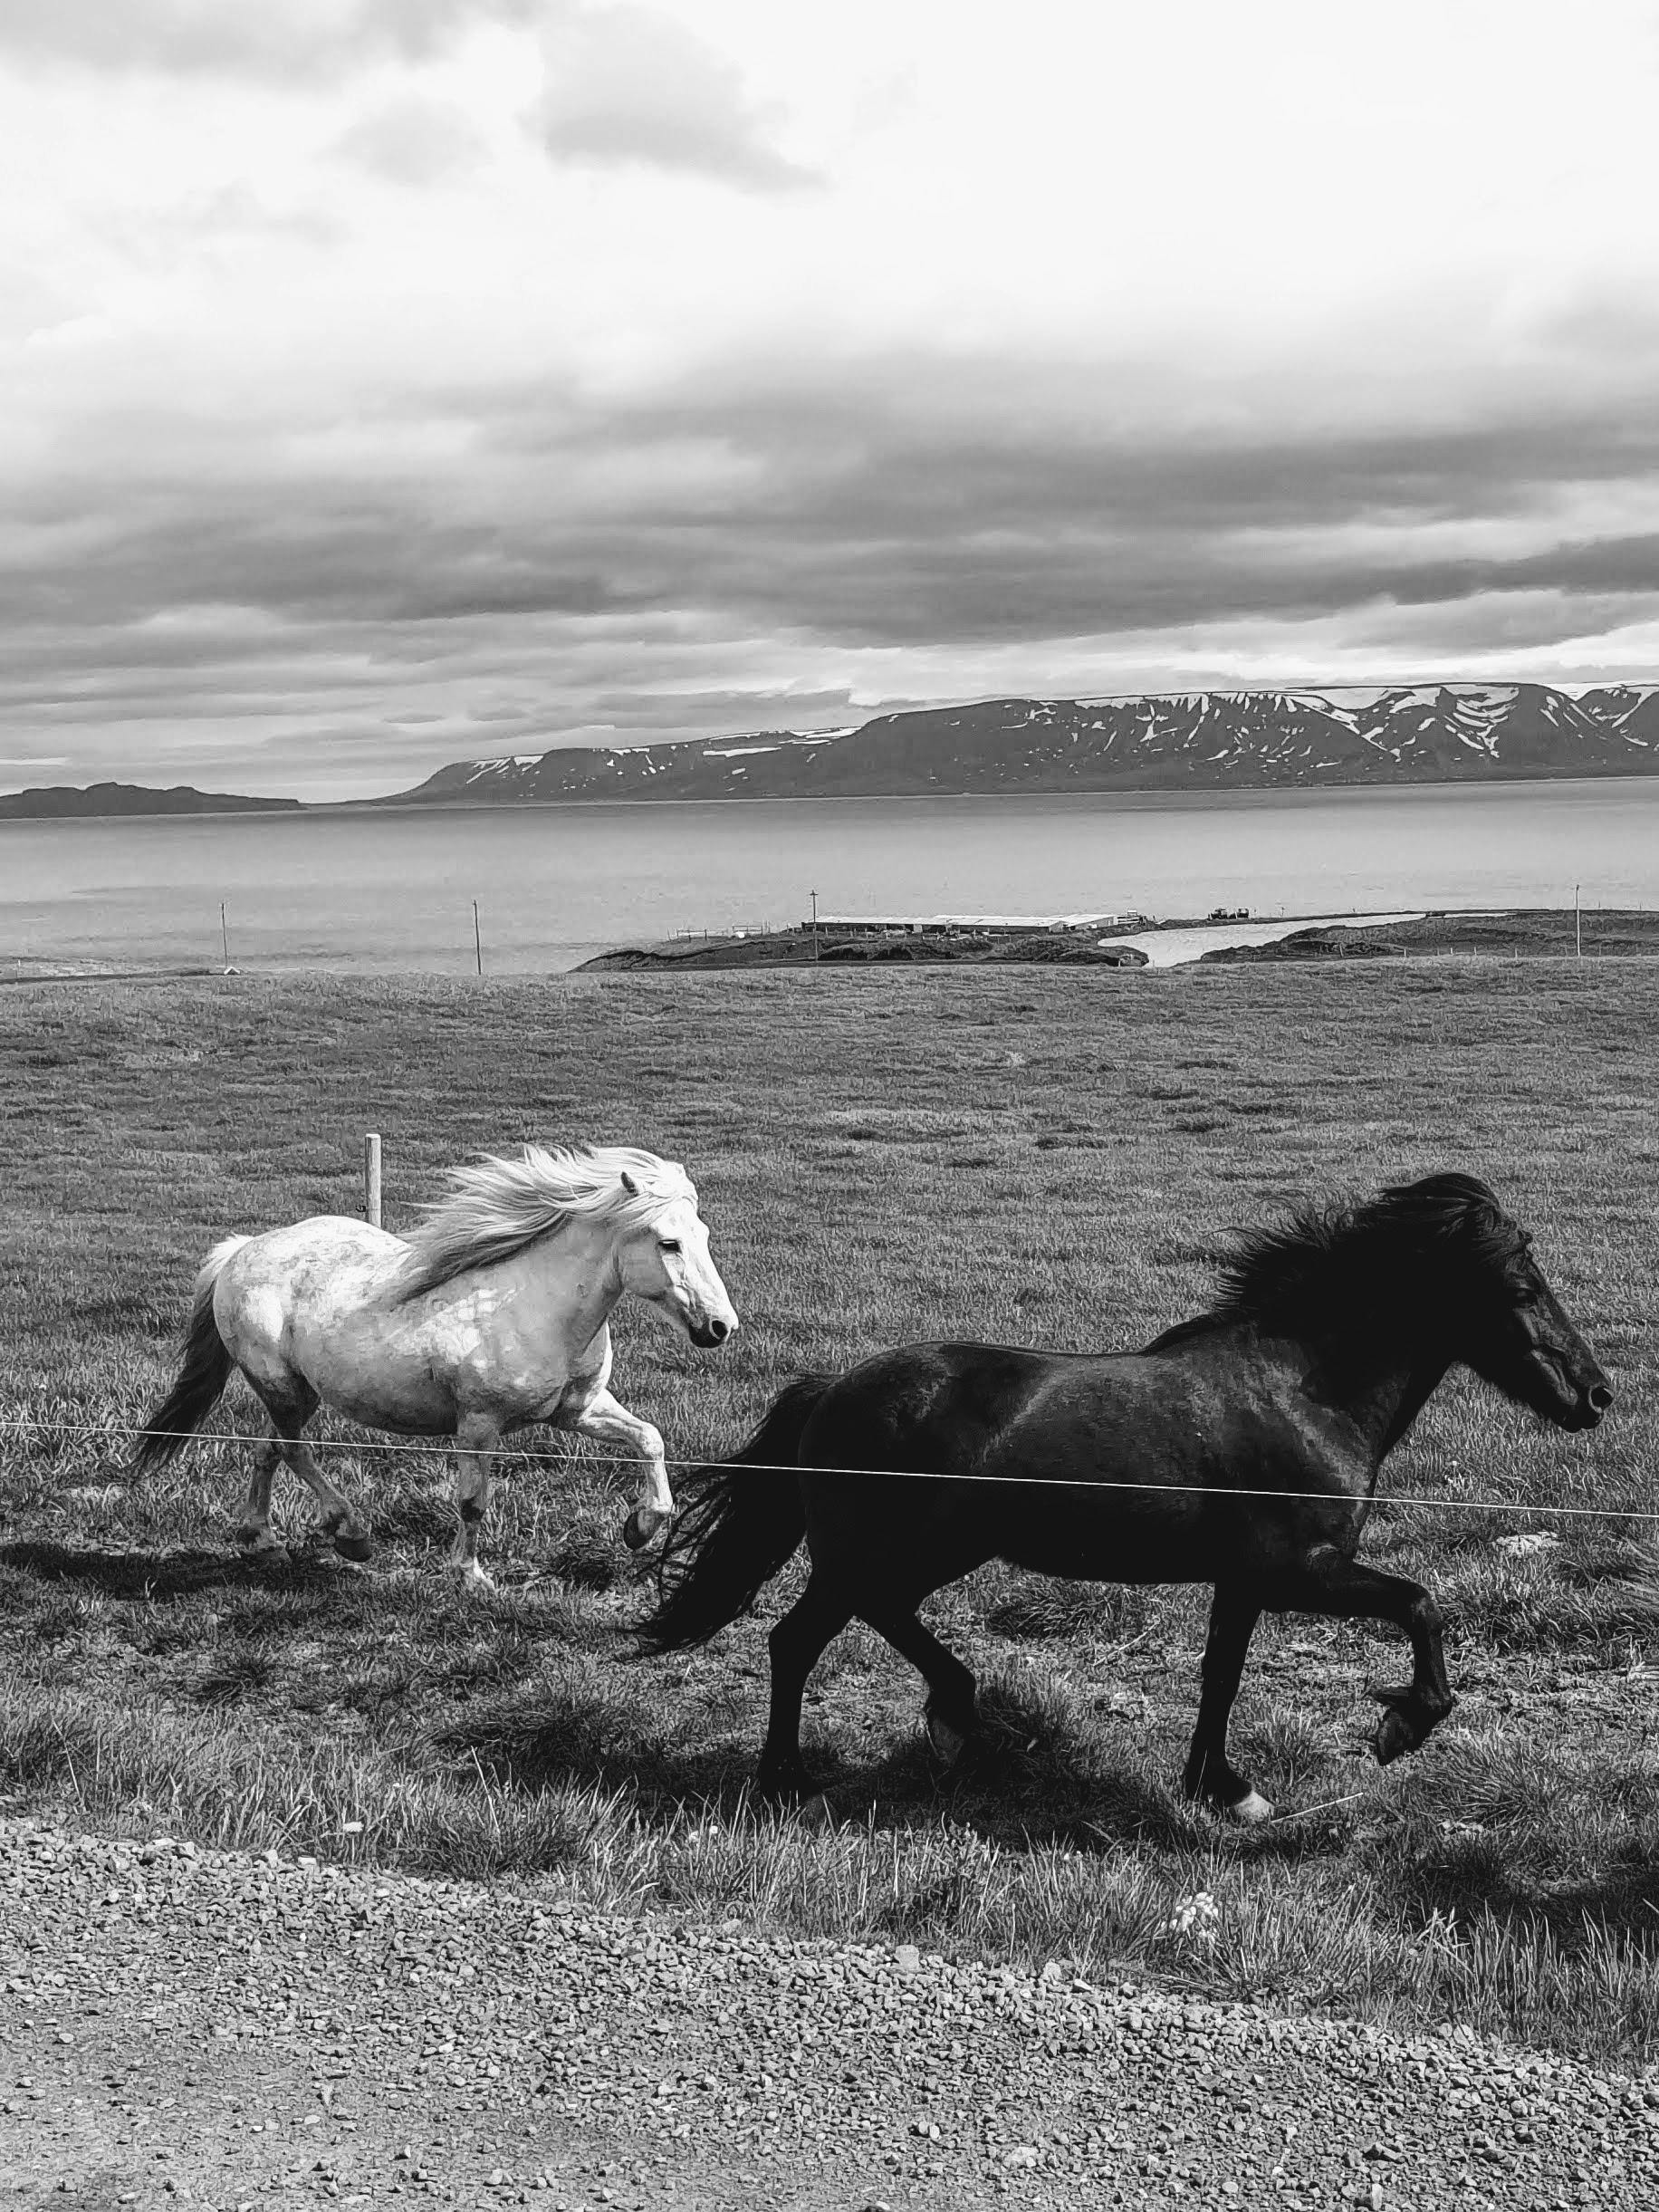 black and white horse running photography